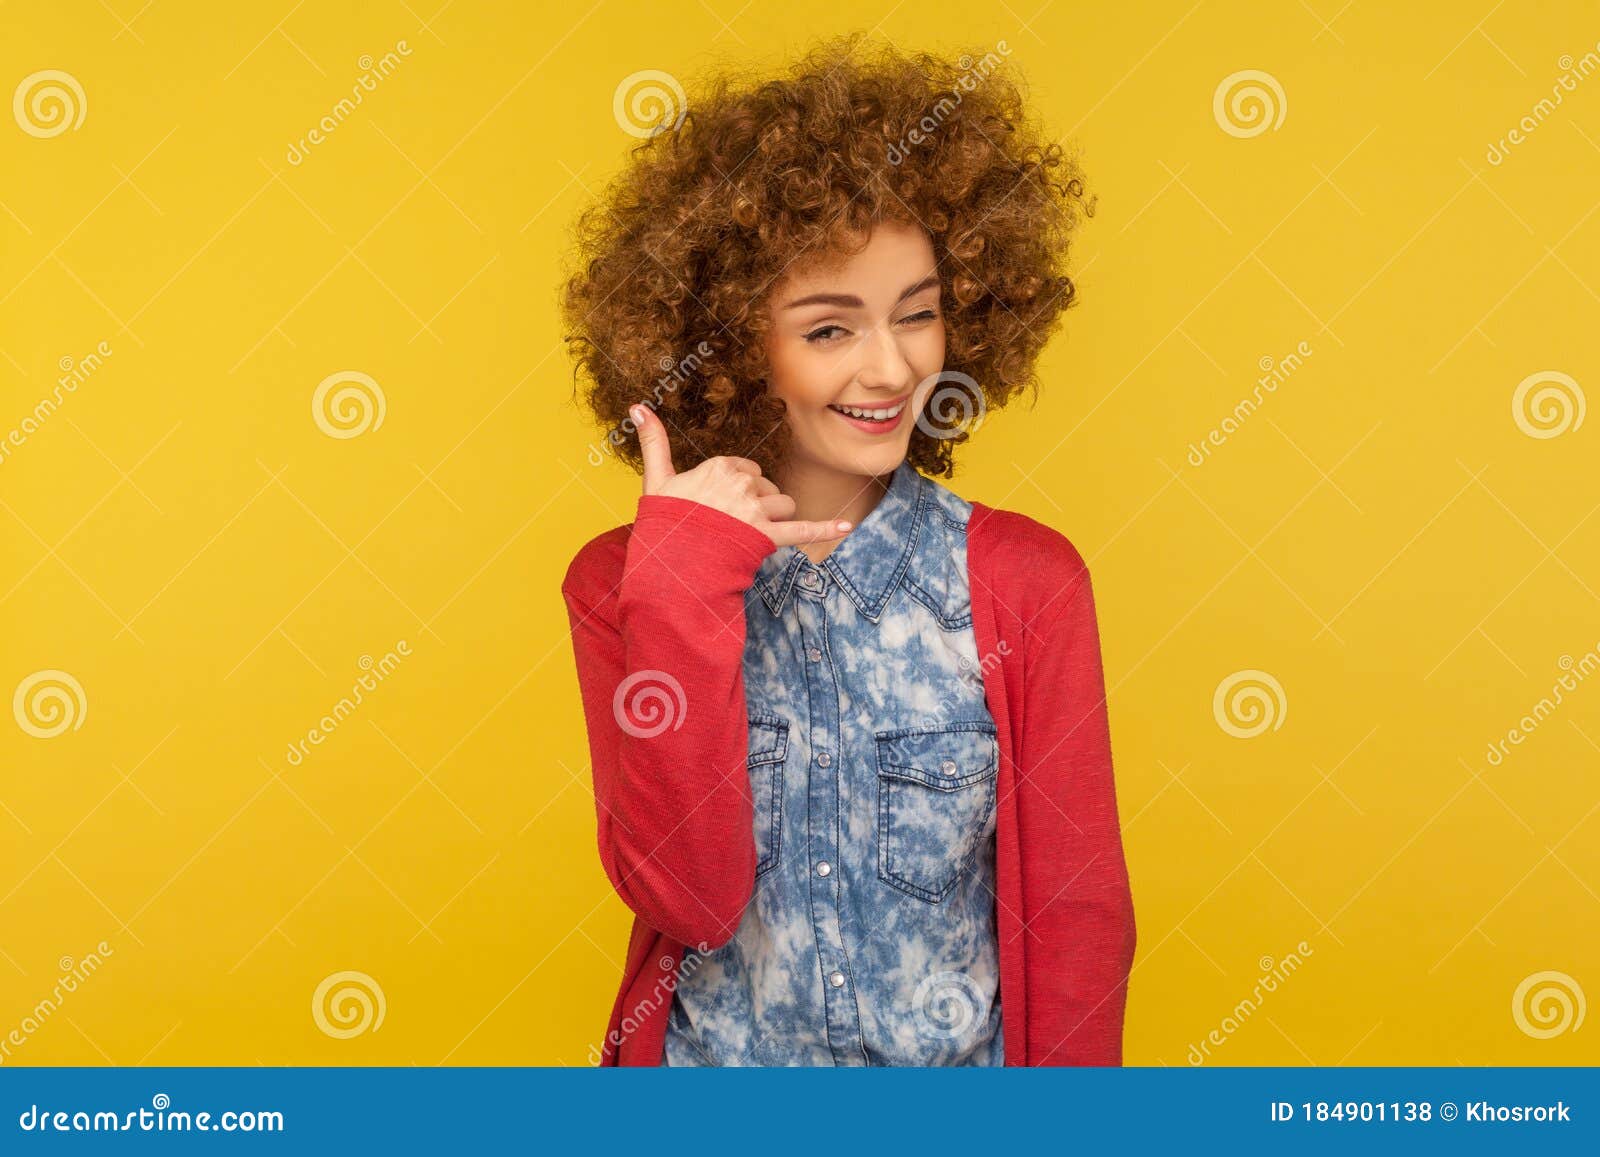 Let`s Contact by Phone! Portrait of Playful Woman with Fluffy Curly ...